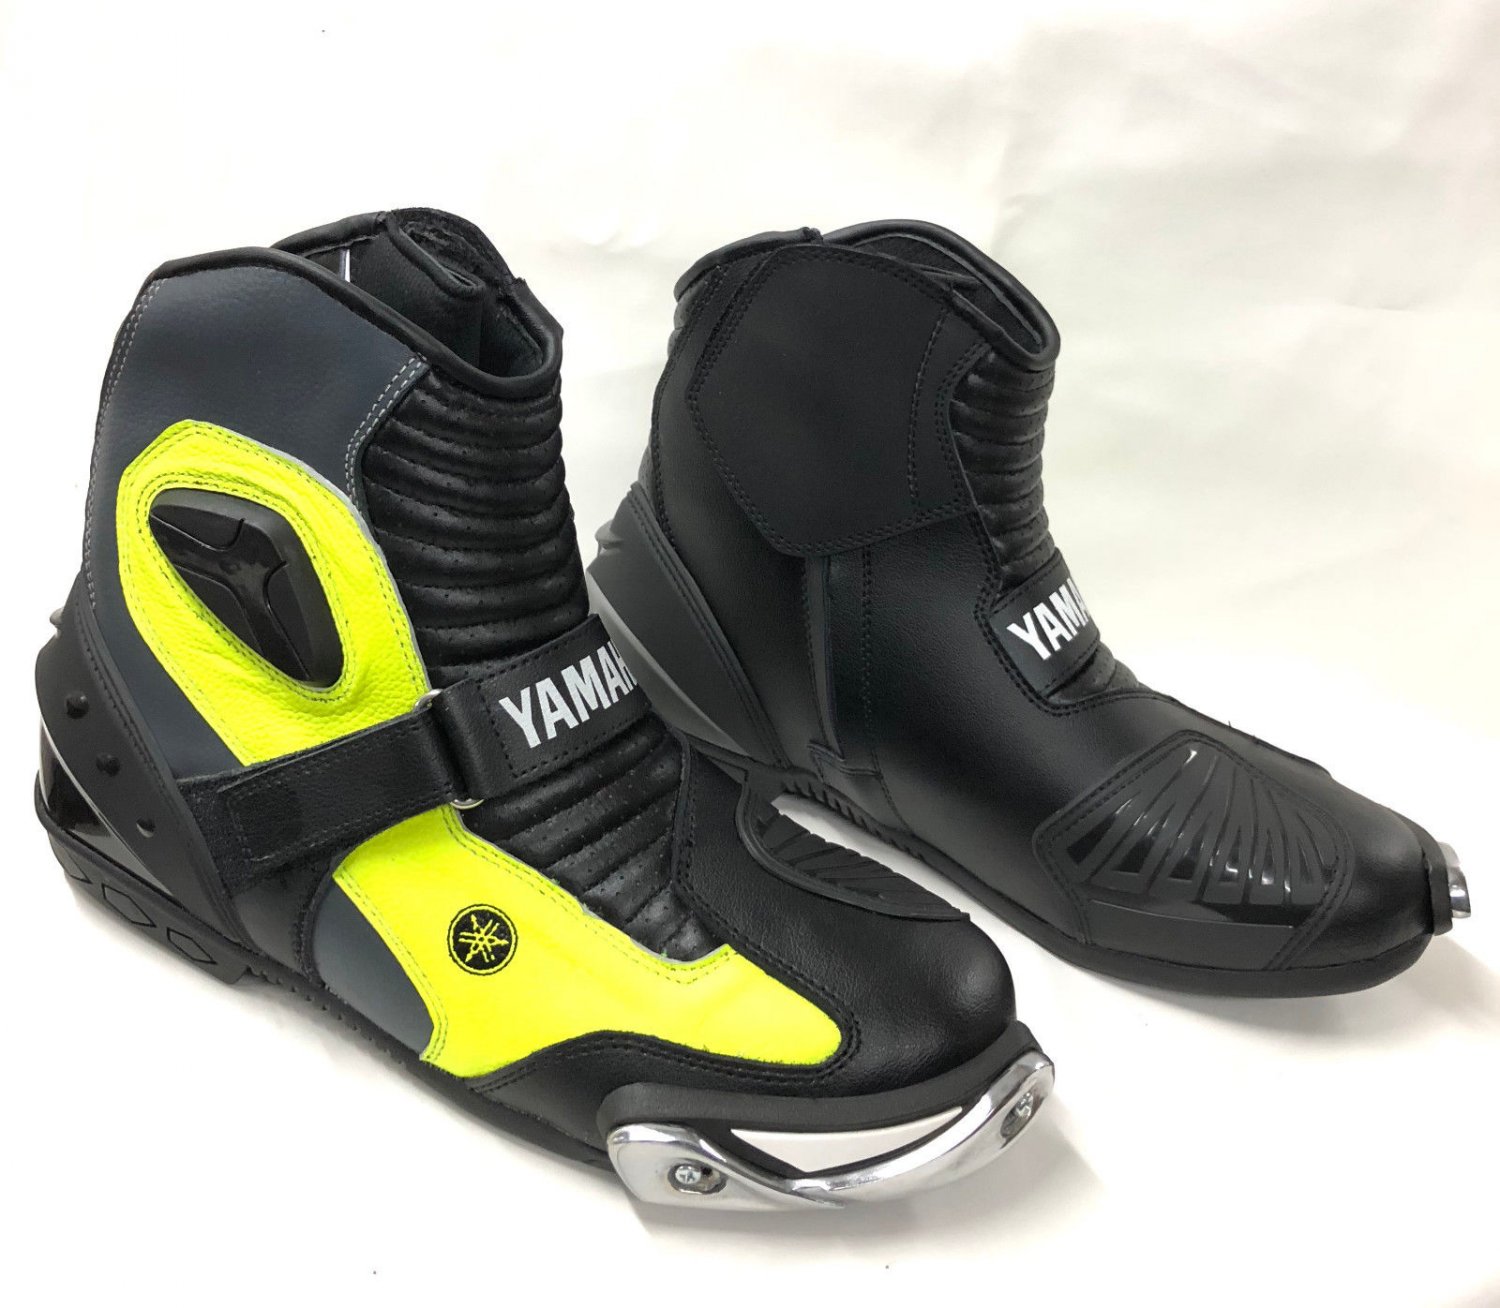 YAMAHA Motorcycle Boots Riding Leather Boots All Size Available